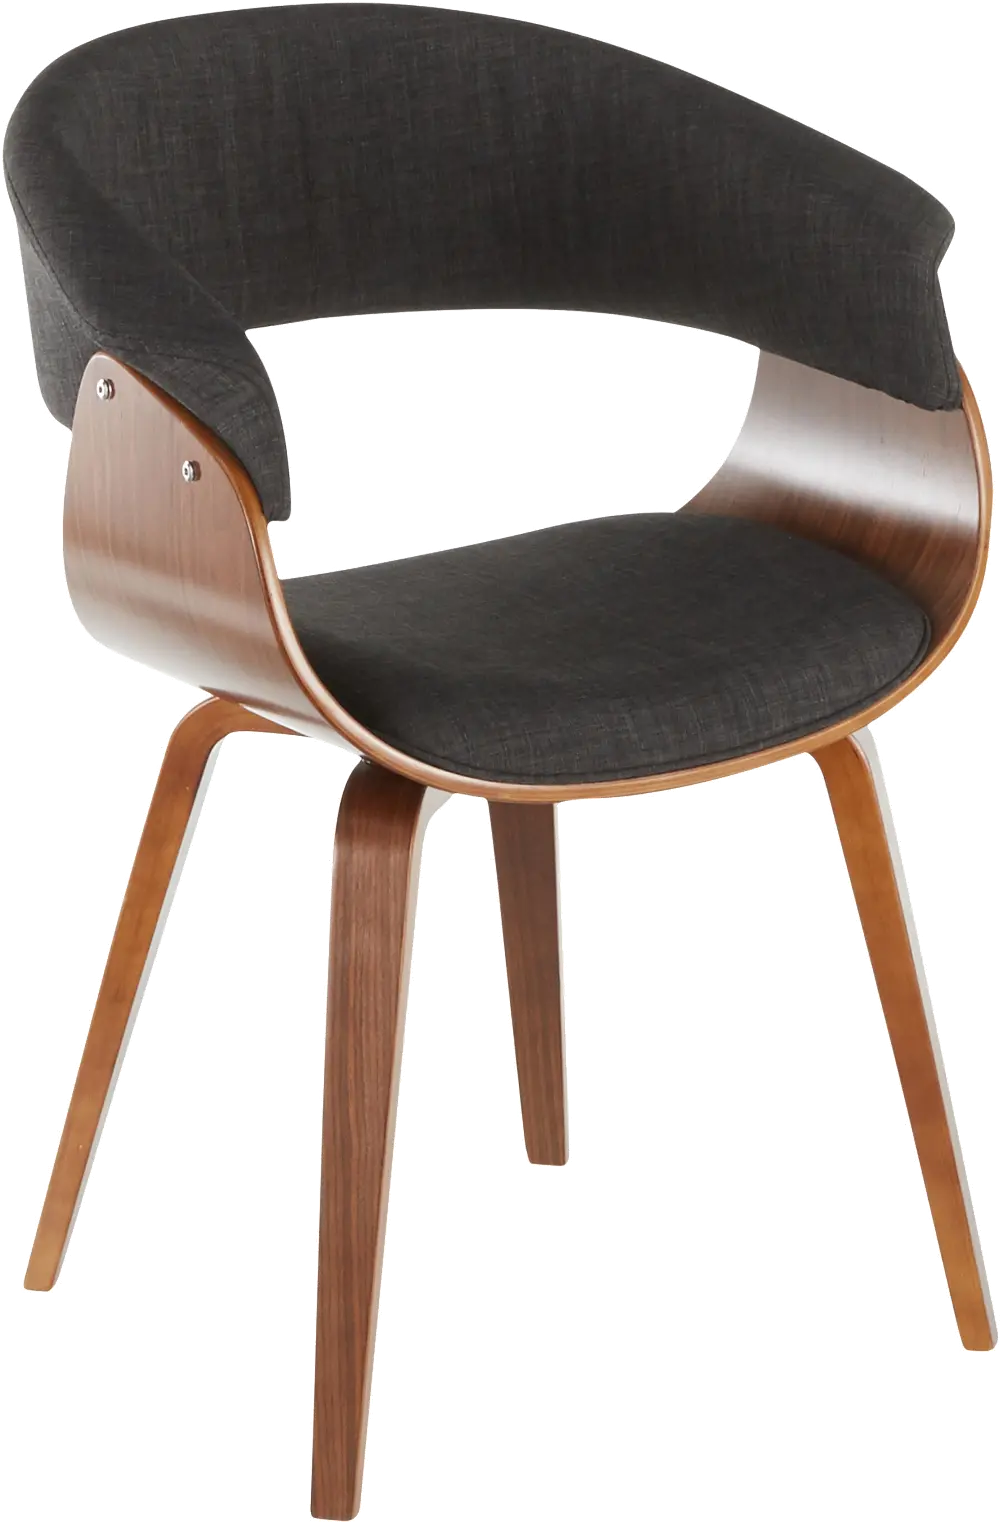 CH-VMONL WLCHAR Mid Century Brown and Charcoal Dining Room Chair - Vintage Mod-1